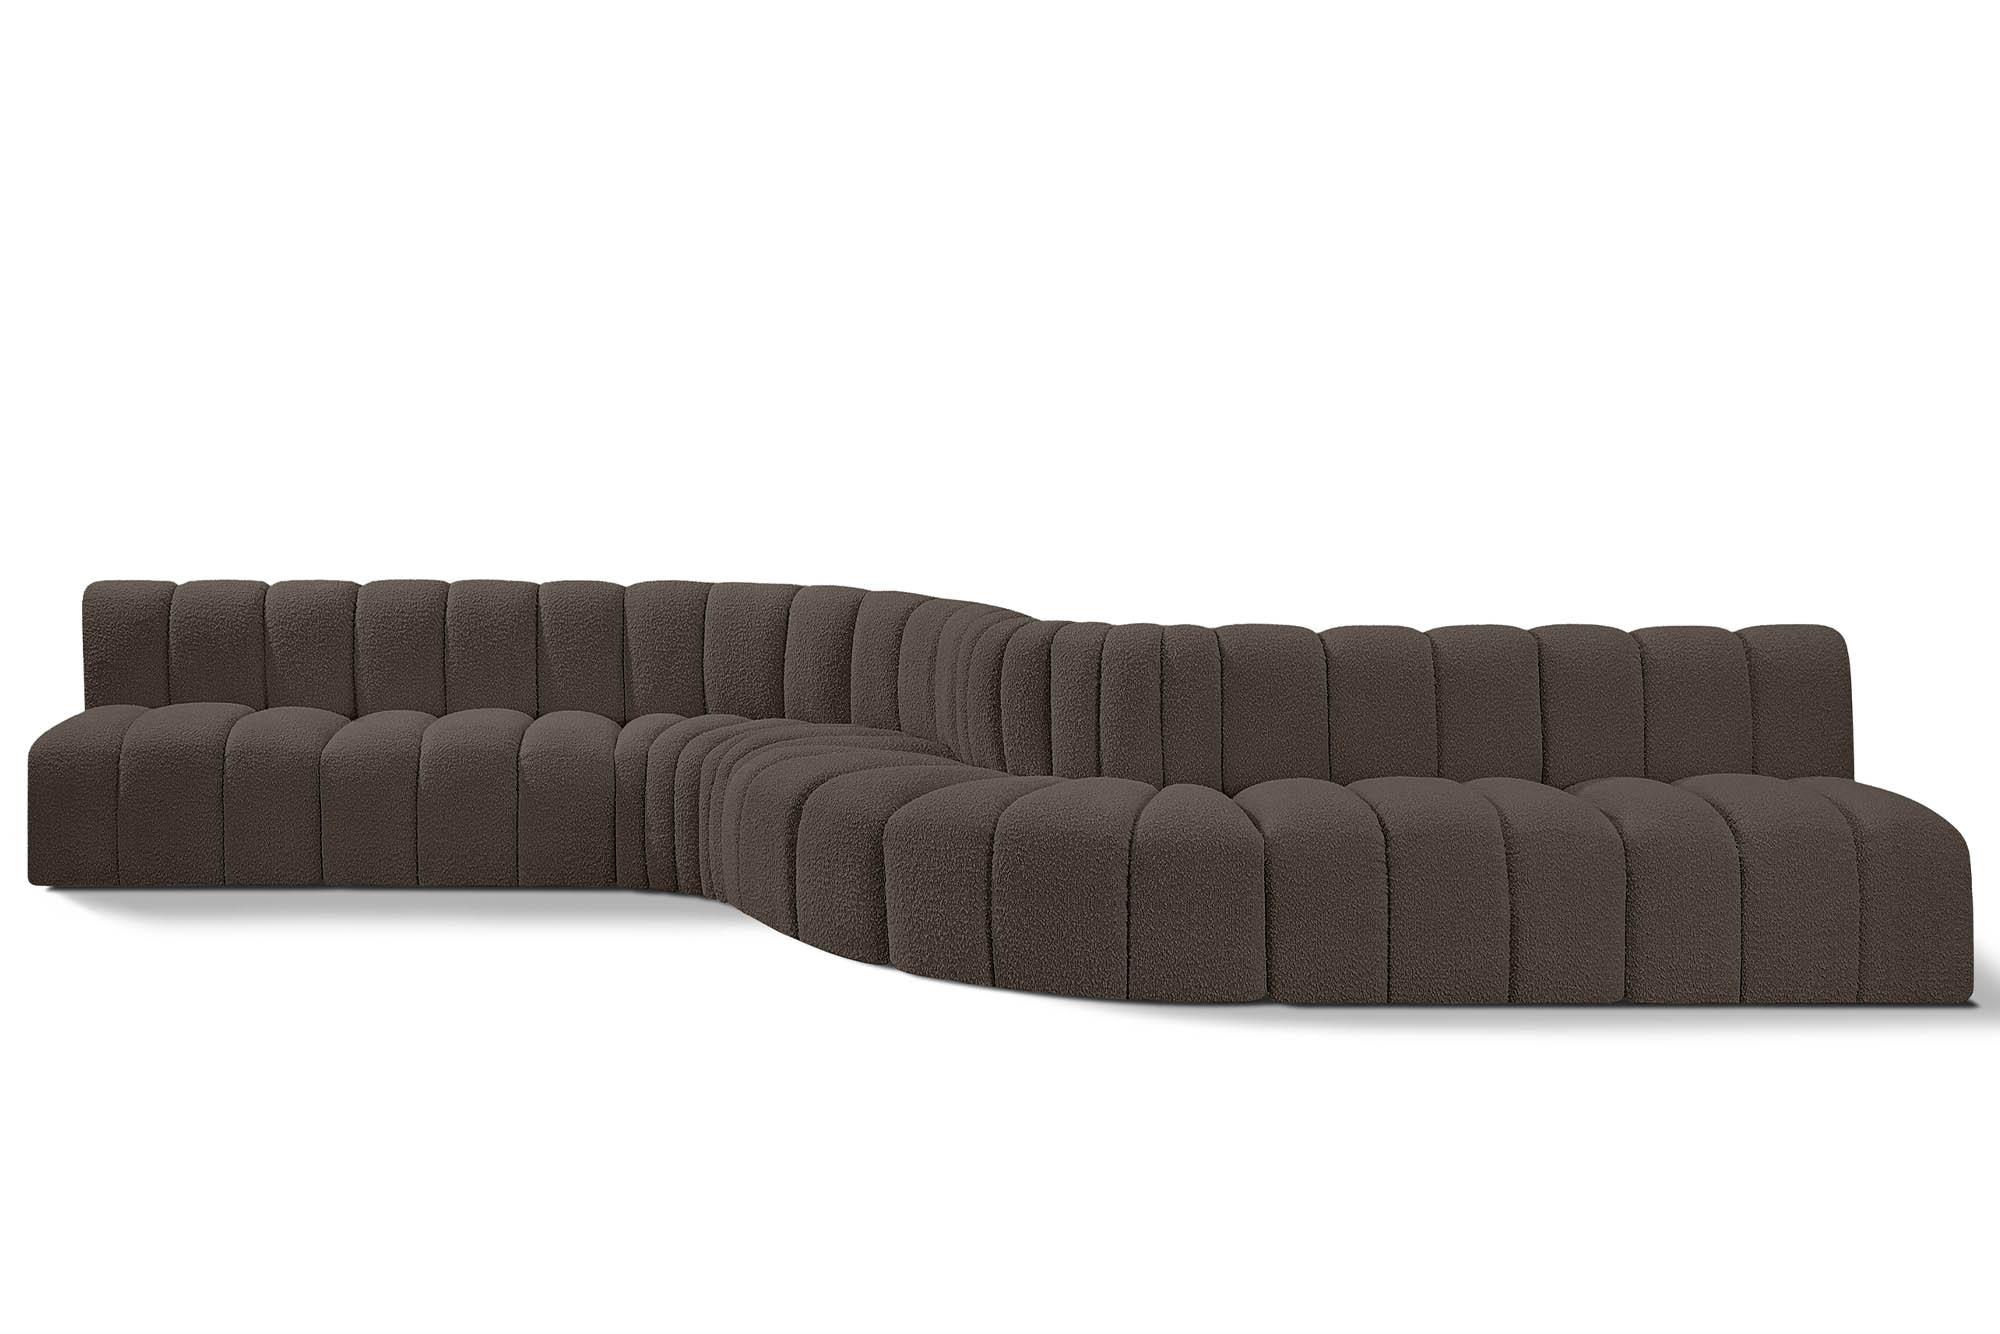 Contemporary, Modern Modular Sectional Sofa ARC 102Brown-S8C 102Brown-S8C in Brown 